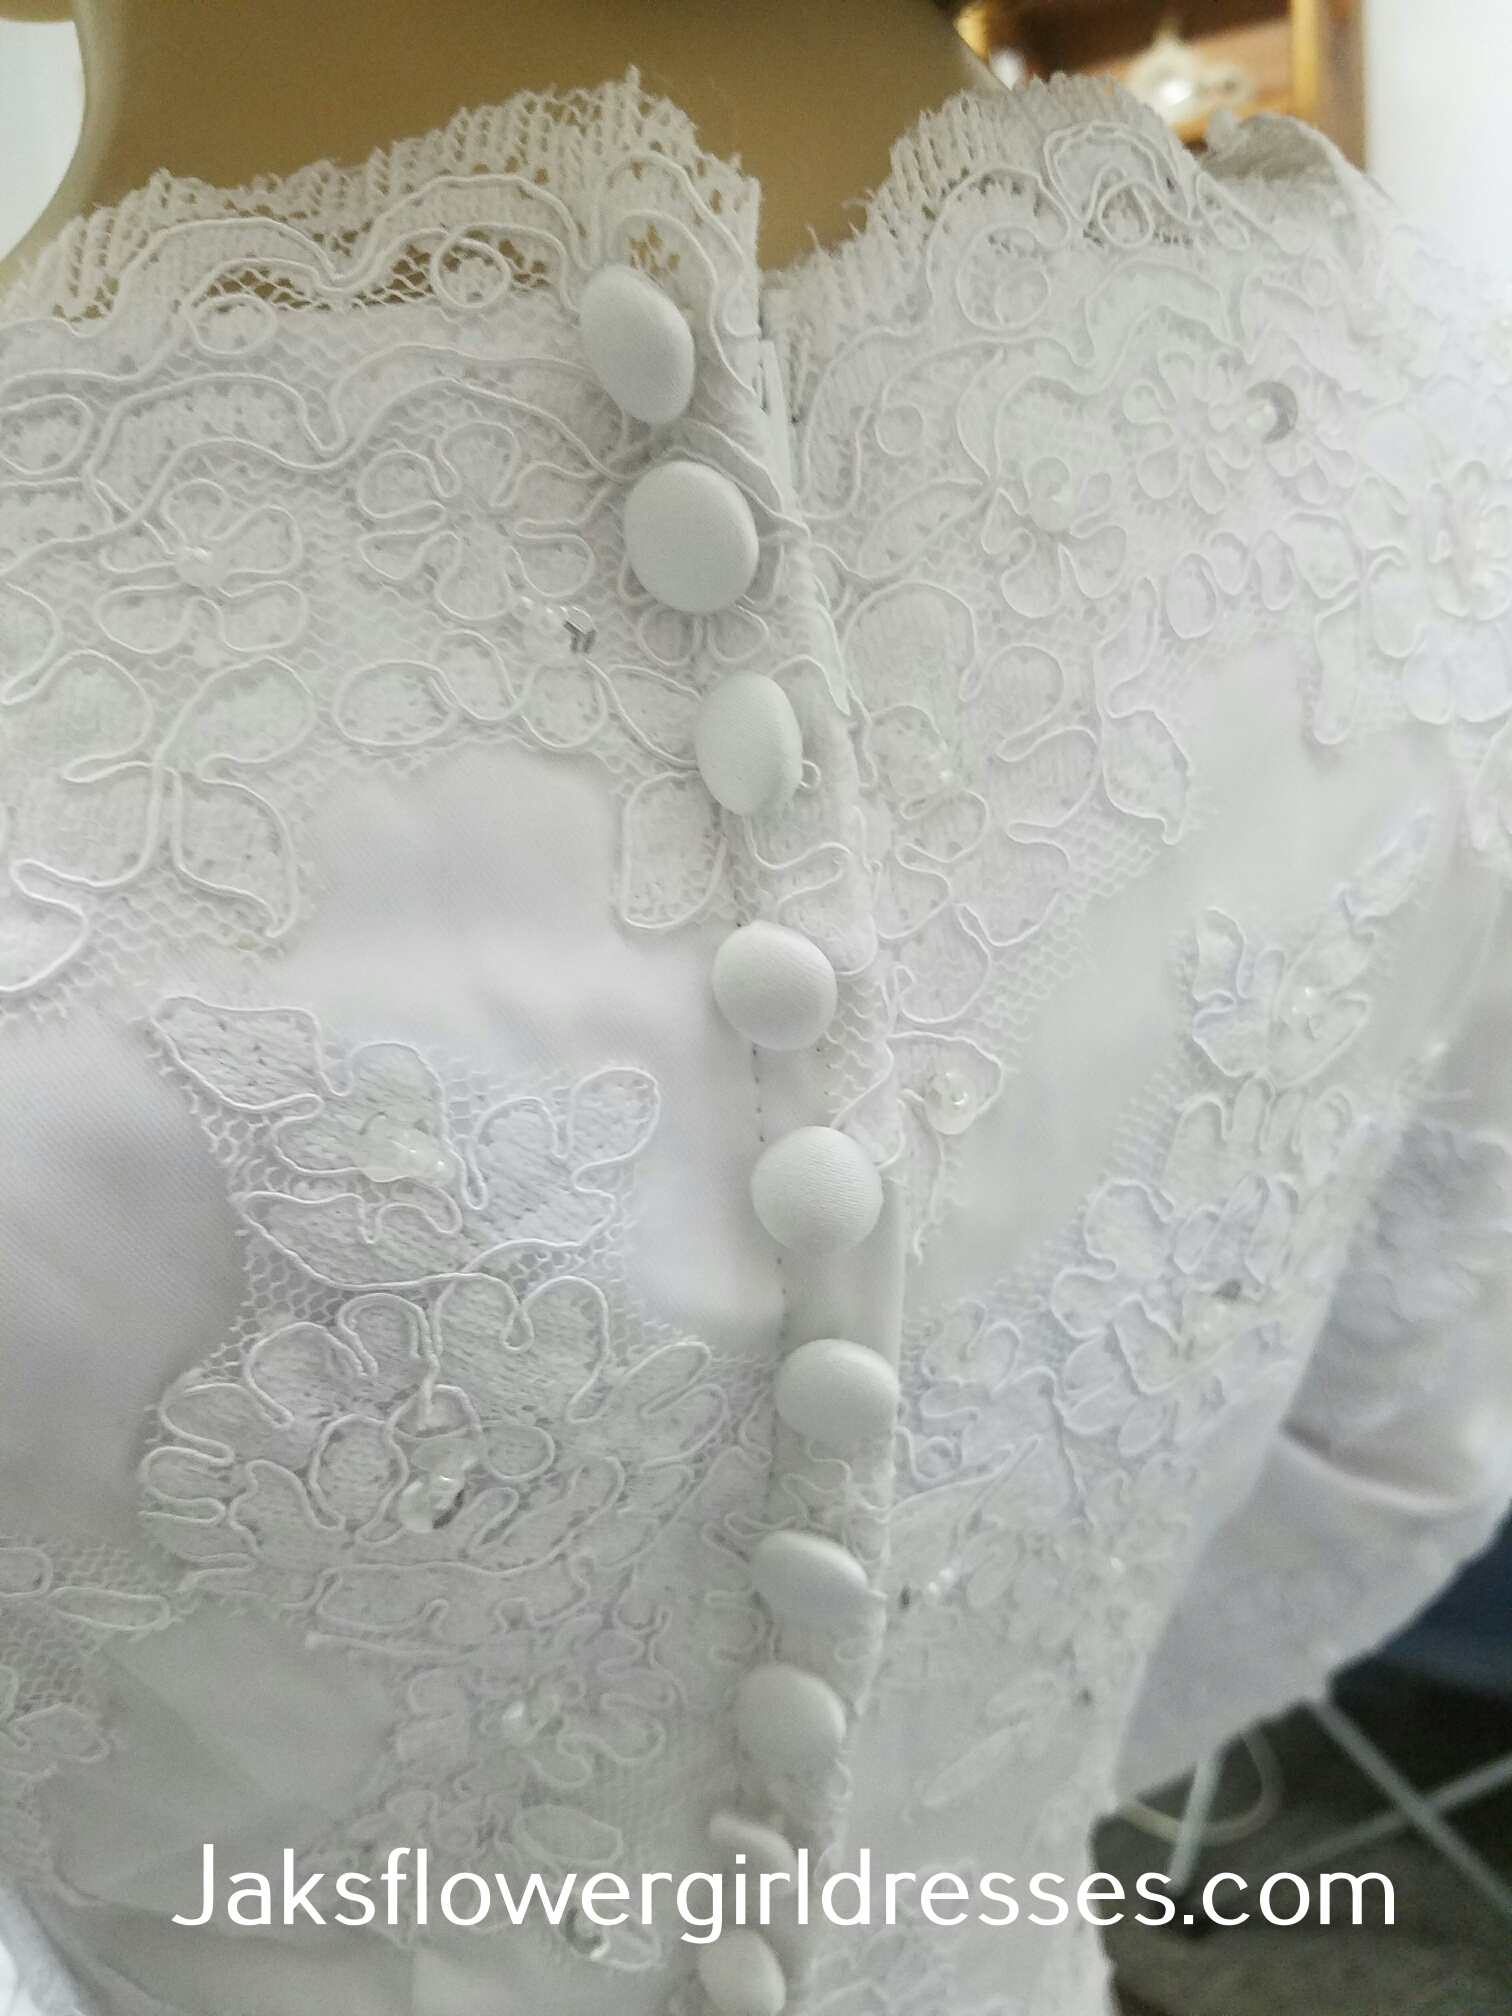 covered buttons over zipper